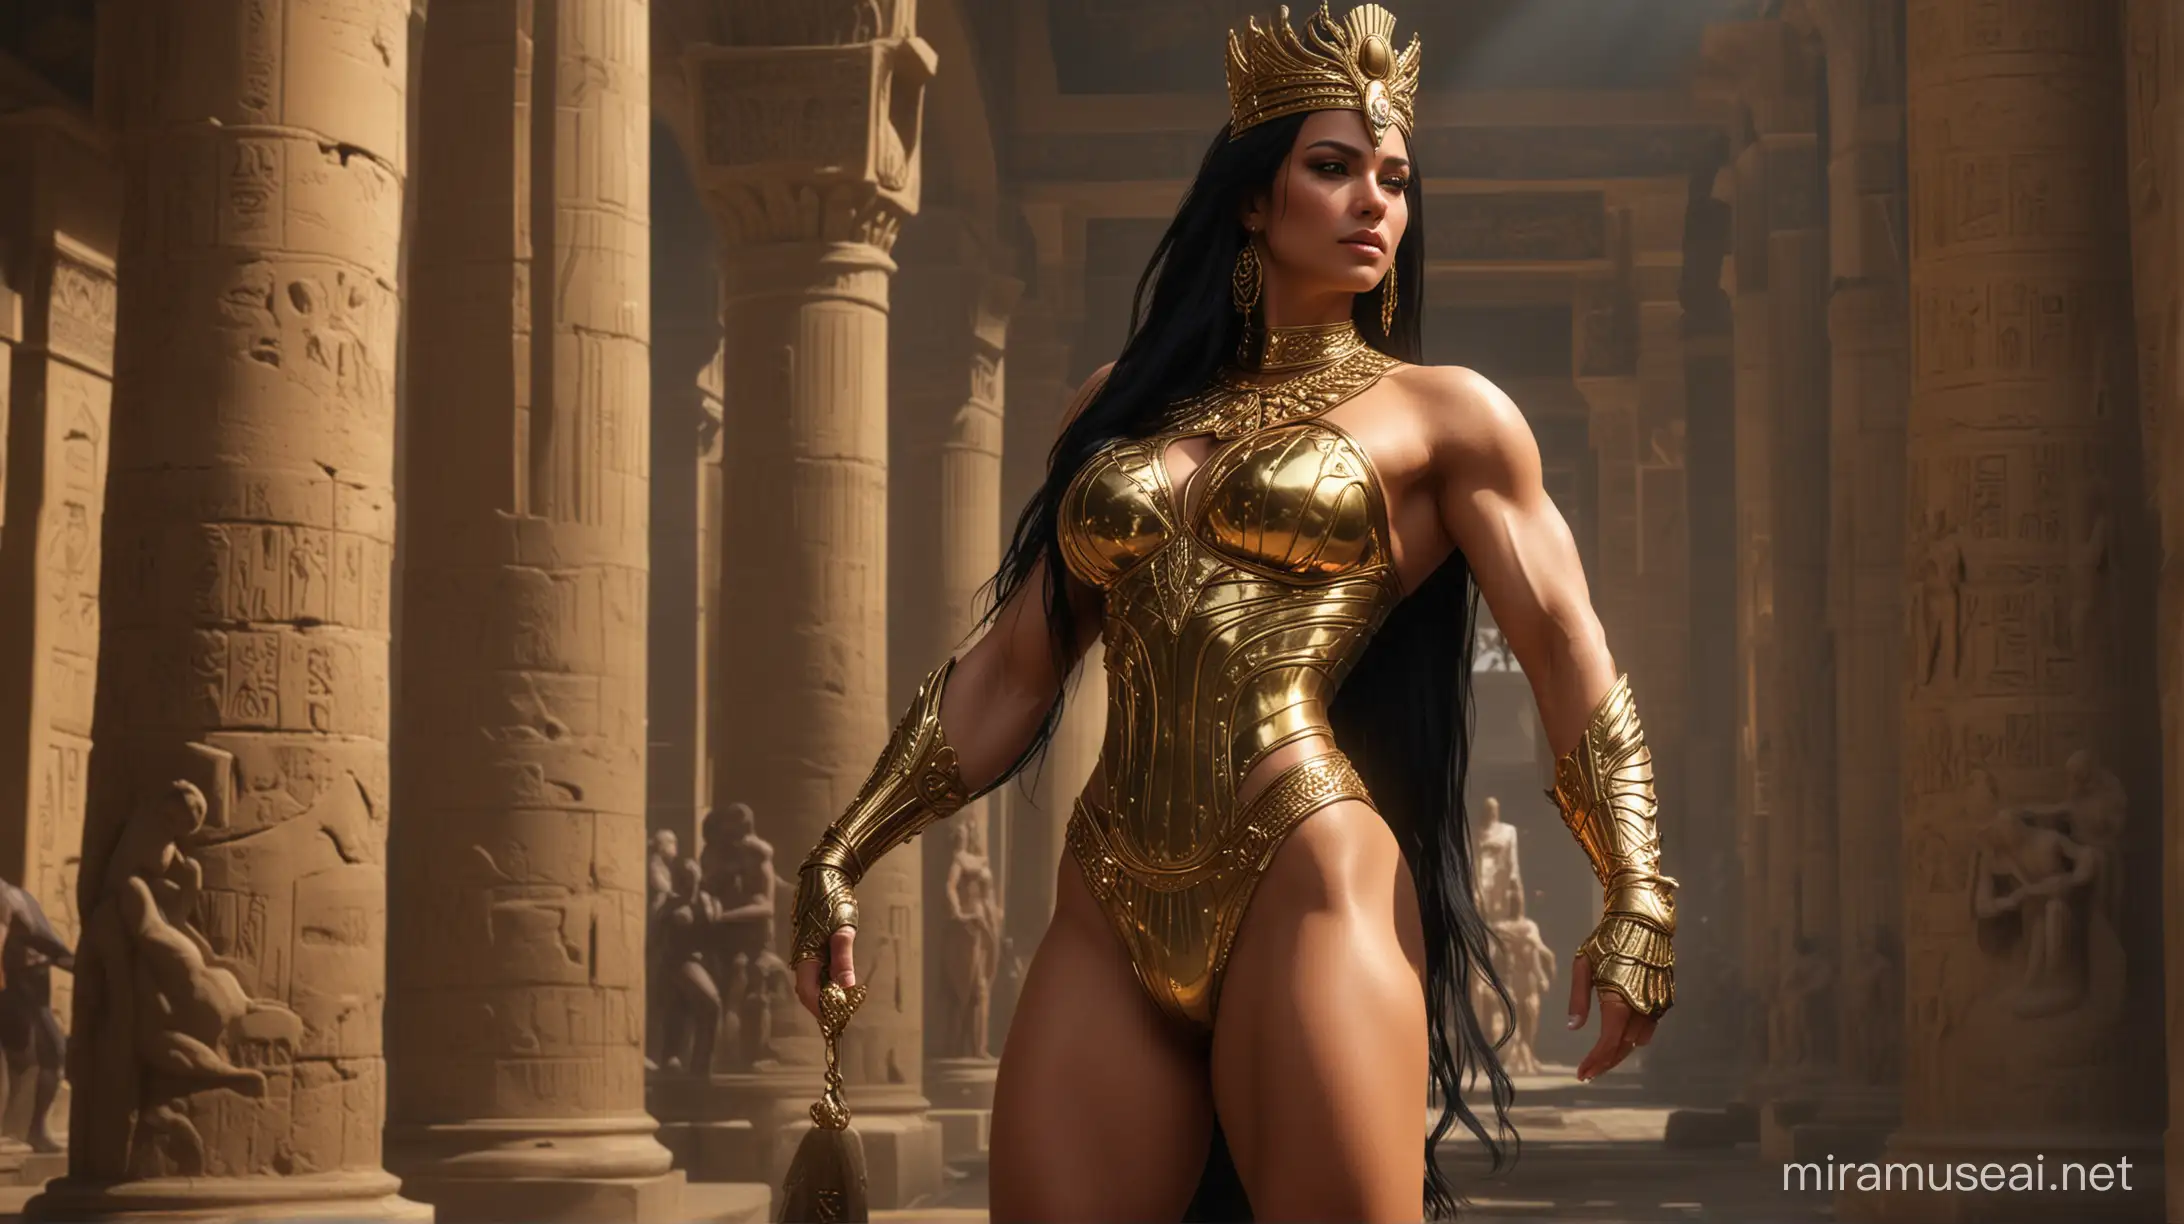 Egyptian Queen Bodybuilder Regal Authority and Muscular Presence in Opulent Gold